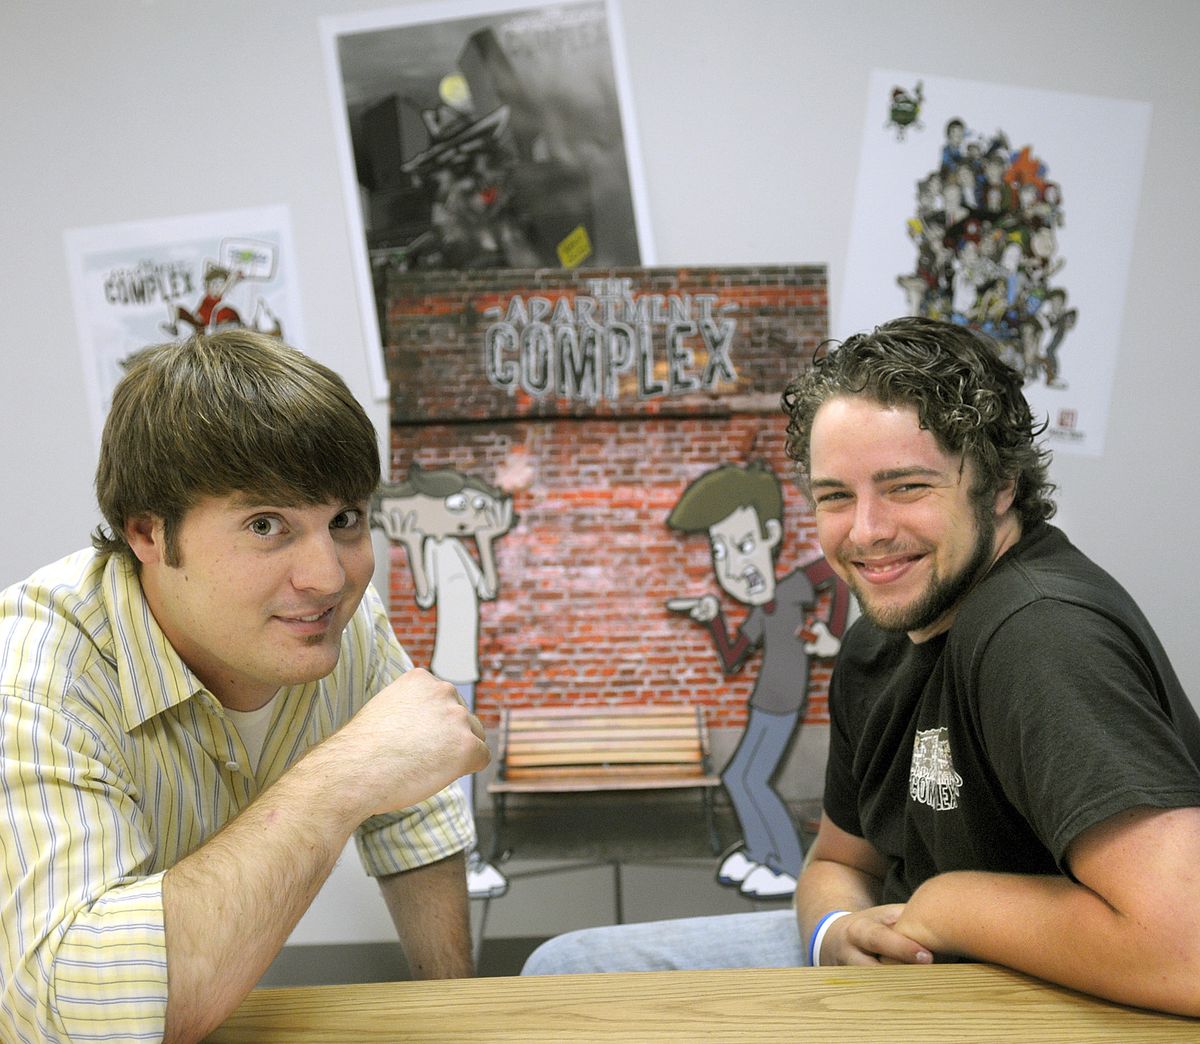 Clancy Bundy, left, and Curtis Chandler team up to produce the comic strip “The Apartment Complex,” a humorous look at the lives of college students and roommates Toby and Taylor. (CHRISTOPHER ANDERSON / The Spokesman-Review)